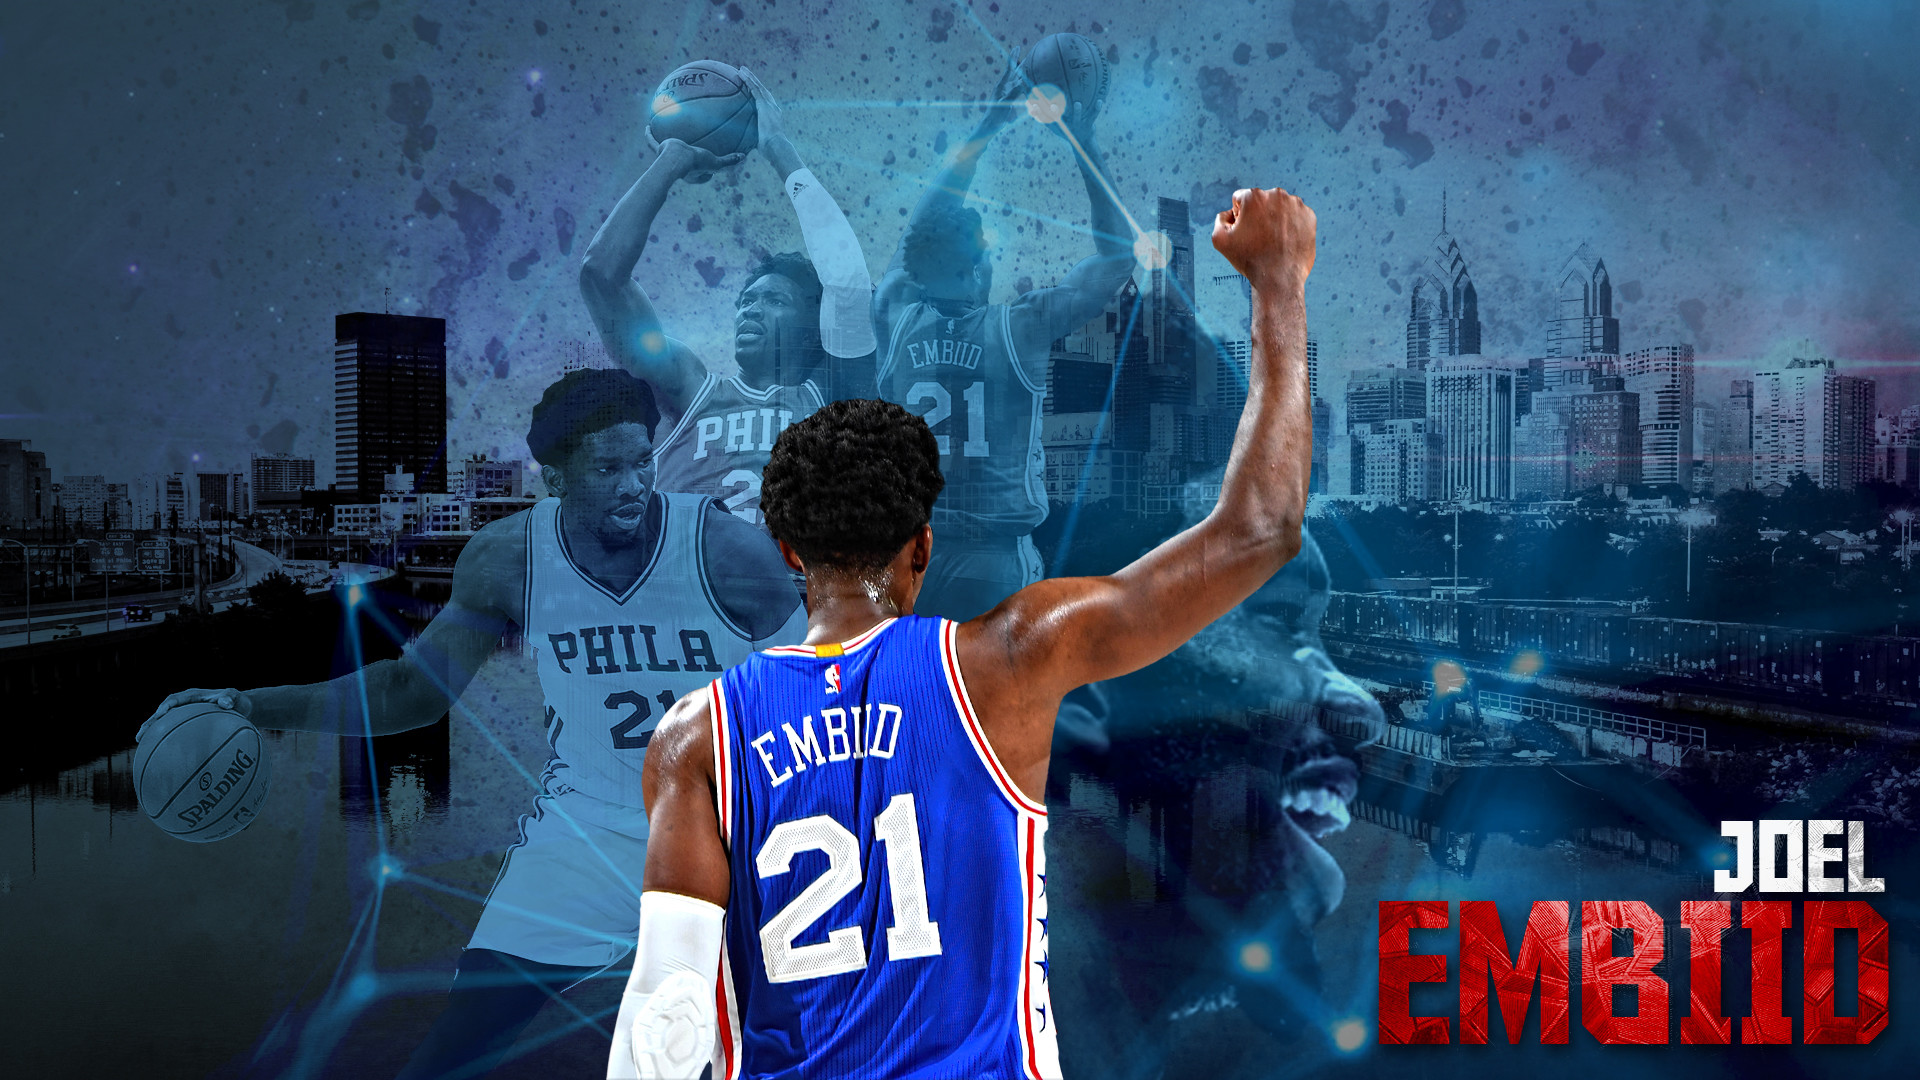 Jr NBA Asia  Download this FREE wallpaper of Joel Embiid and Ben Simmons  from the Philadelphia 76ers  HERE httpowly9dVD50ky4nJ Which  players would you like us to create for you next 